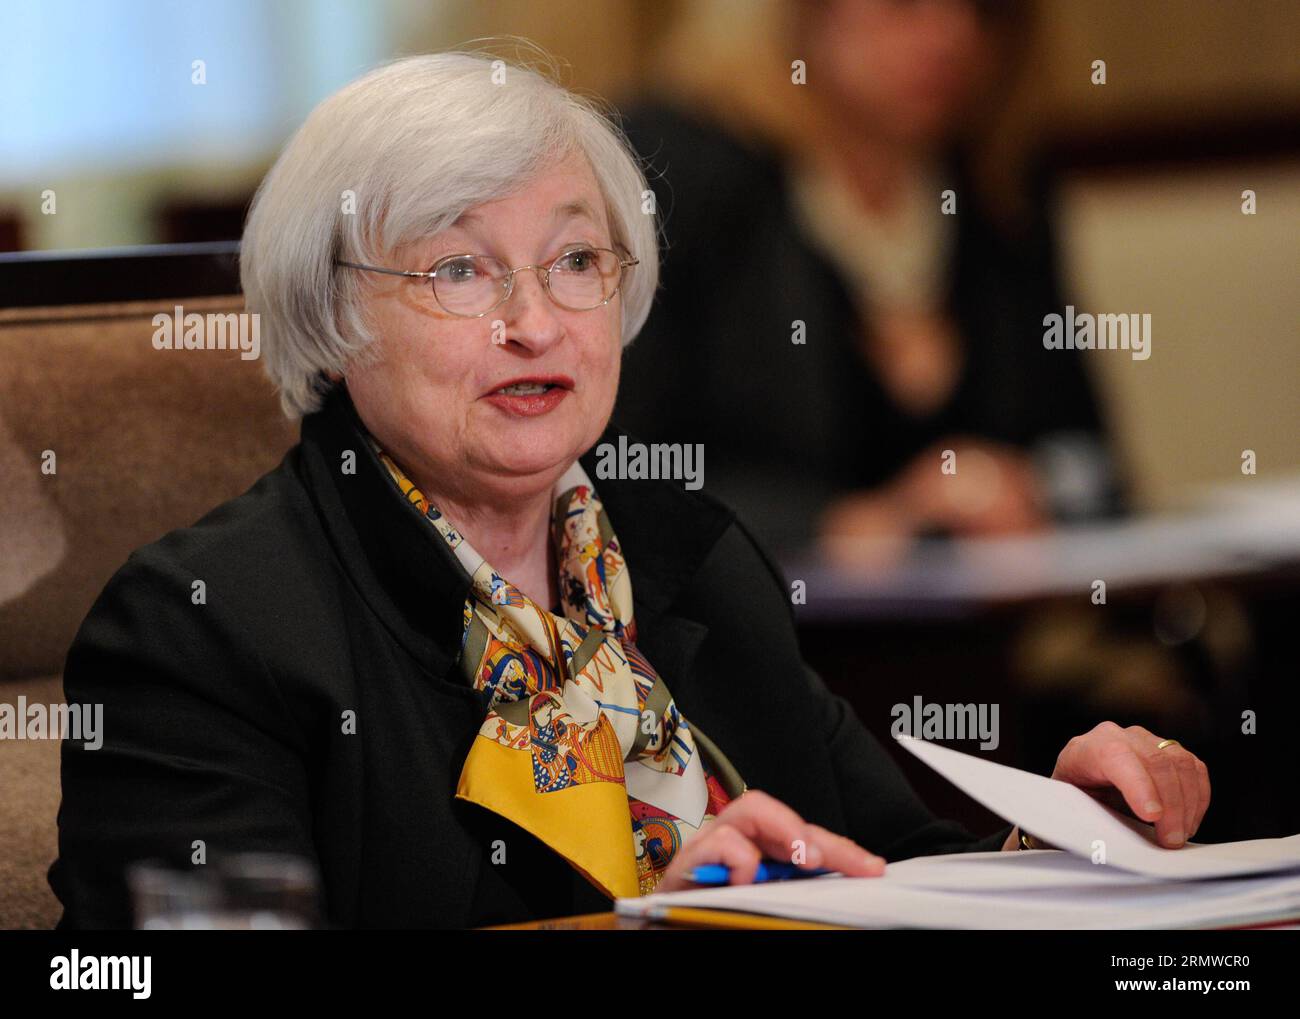 141022 -- WASHINGTON D.C., Oct. 22, 2014 -- U.S. Federal Reserve Chair Janet Yellen attends an open meeting at the U.S. Federal Reserve in Washington D.C., capital of the United States, Oct. 22, 2014. U.S. Fed Board Governors held an open meeting to discuss a final rulemaking requiring sponsors of securitization transactions to retain risk in those transactions.  US-WASHINGTON-FEDERAL RESERVE-MEETING BaoxDandan PUBLICATIONxNOTxINxCHN Stock Photo